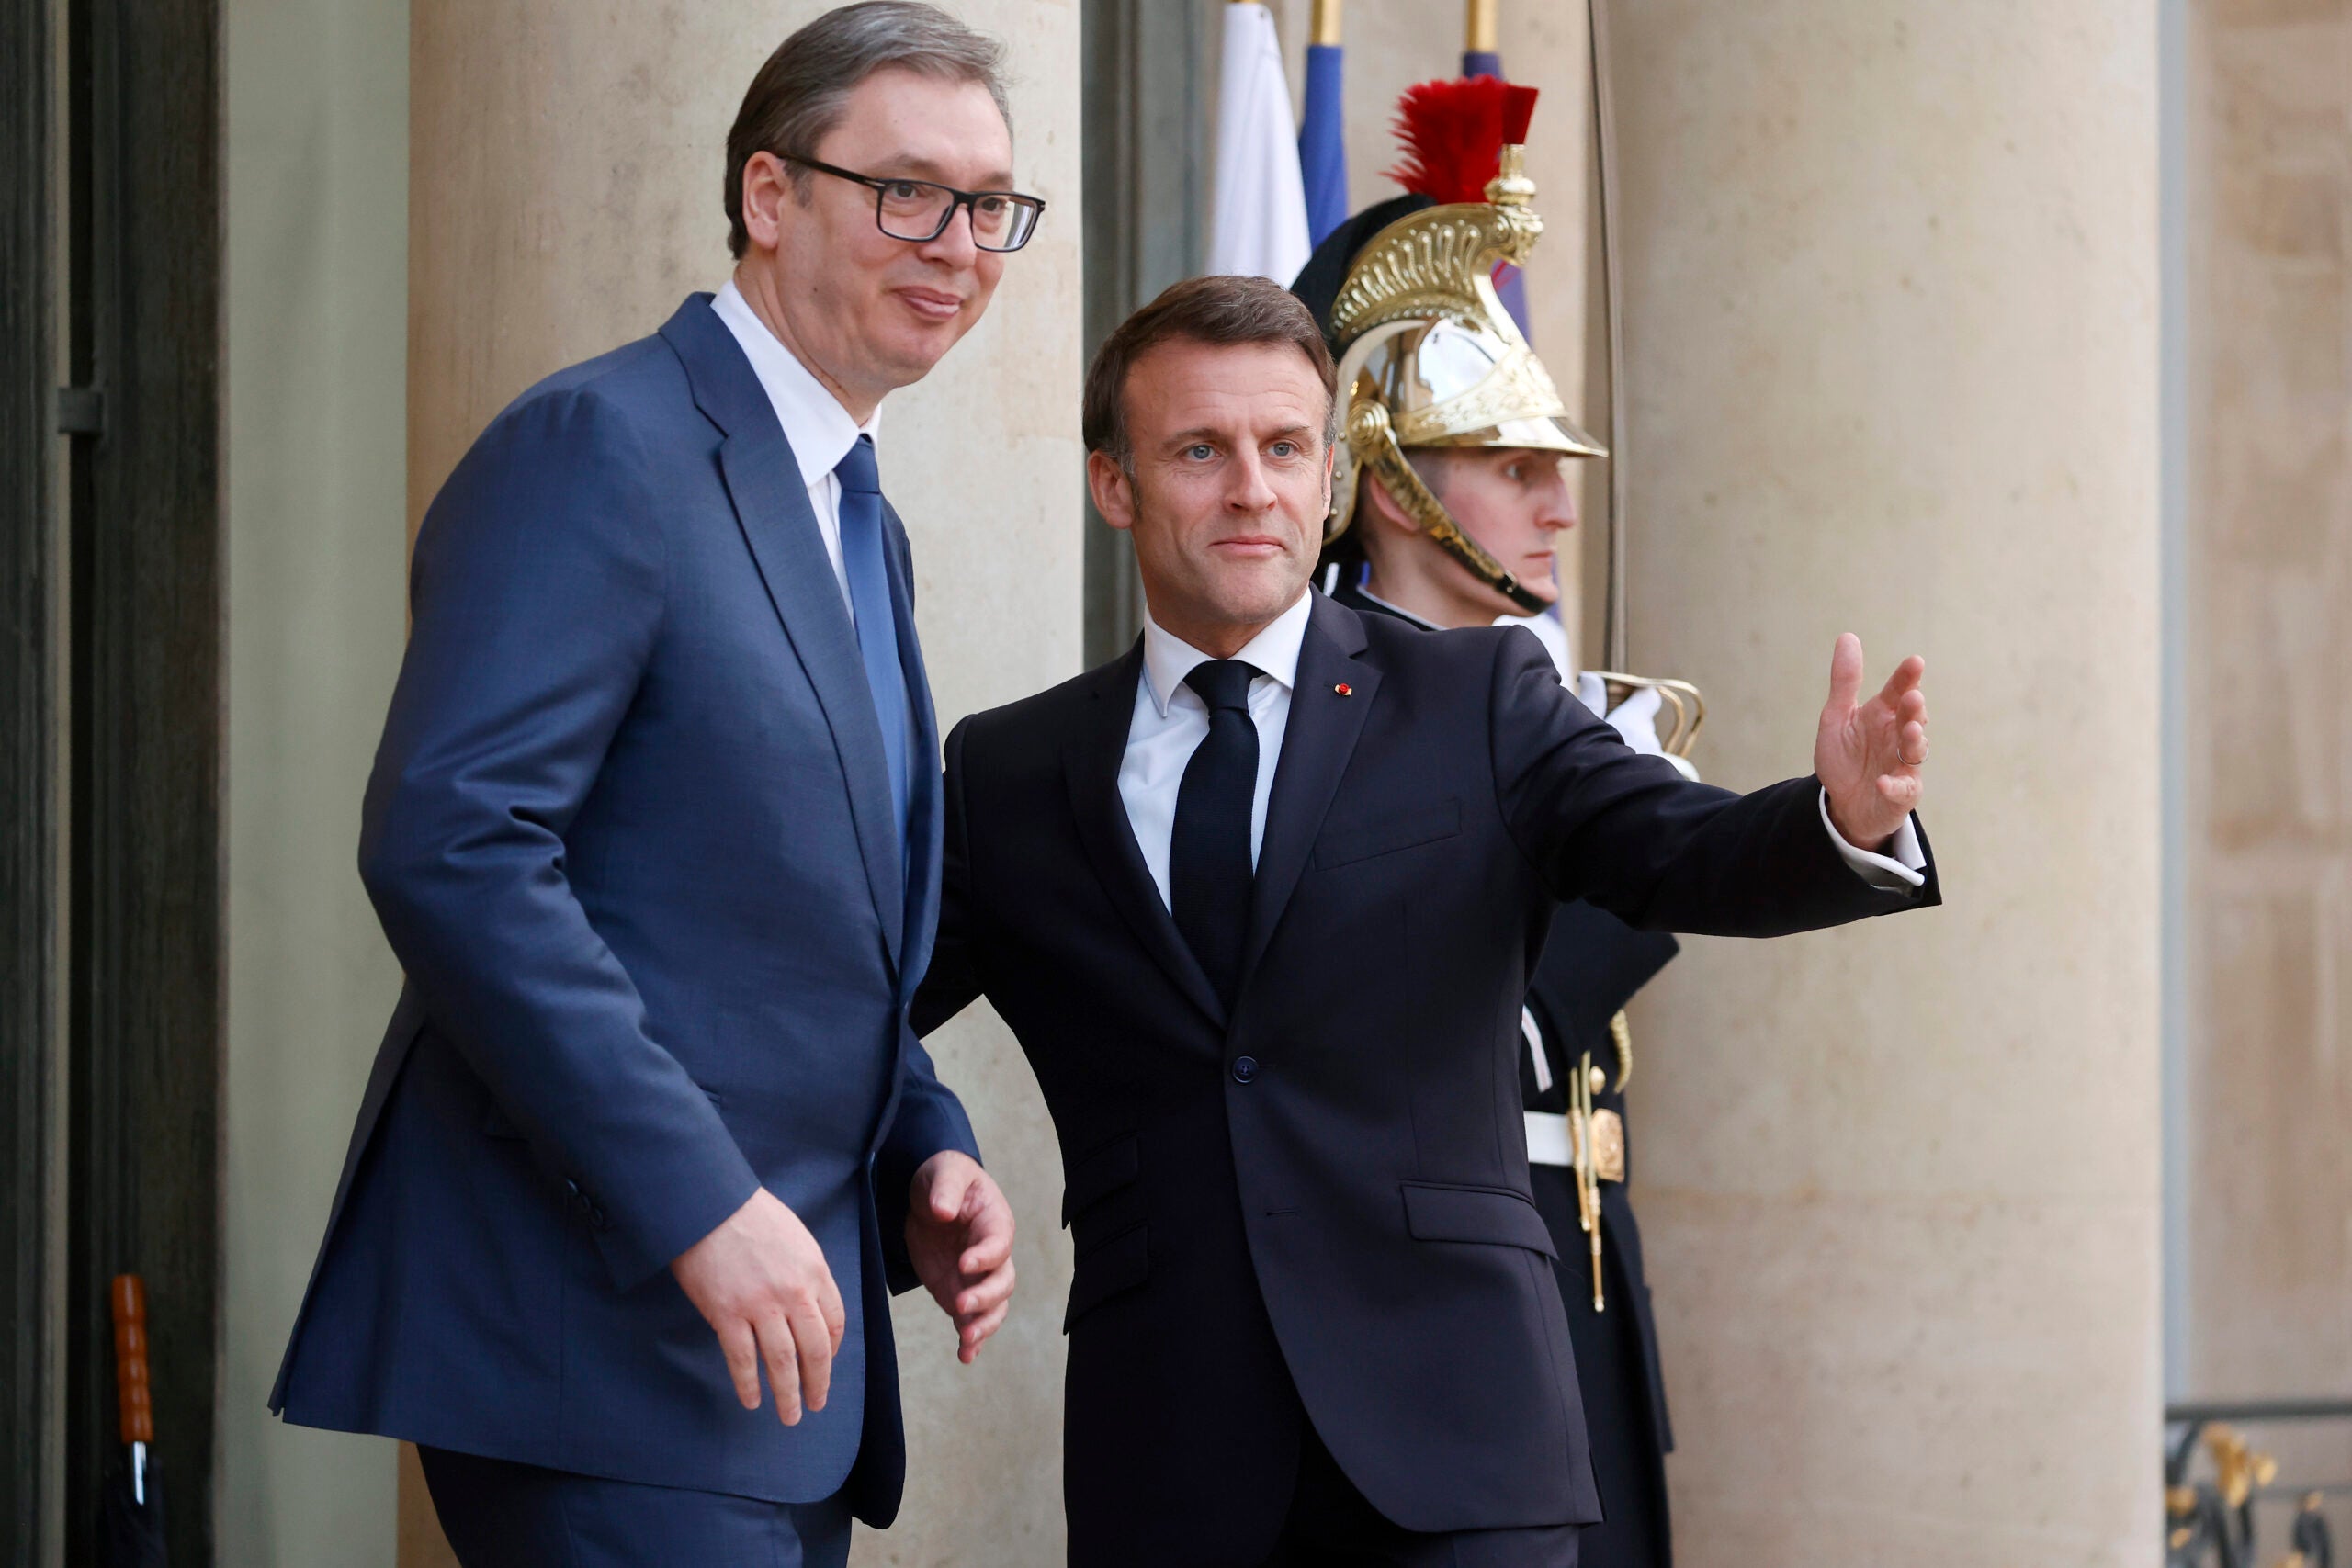 PARIS, FRANCE - APRIL 08: France's President Emmanuel Macron (R) welcomes Serbia's President Aleksandar Vucic prior to their working dinner at the presidential Elysee Palace on April 08, 2024 in Paris, France. The President of France and the President of Serbia have met to discuss the European integration of Serbia and relations between Kosovo and Serbia. (Photo by Chesnot/Getty Images)